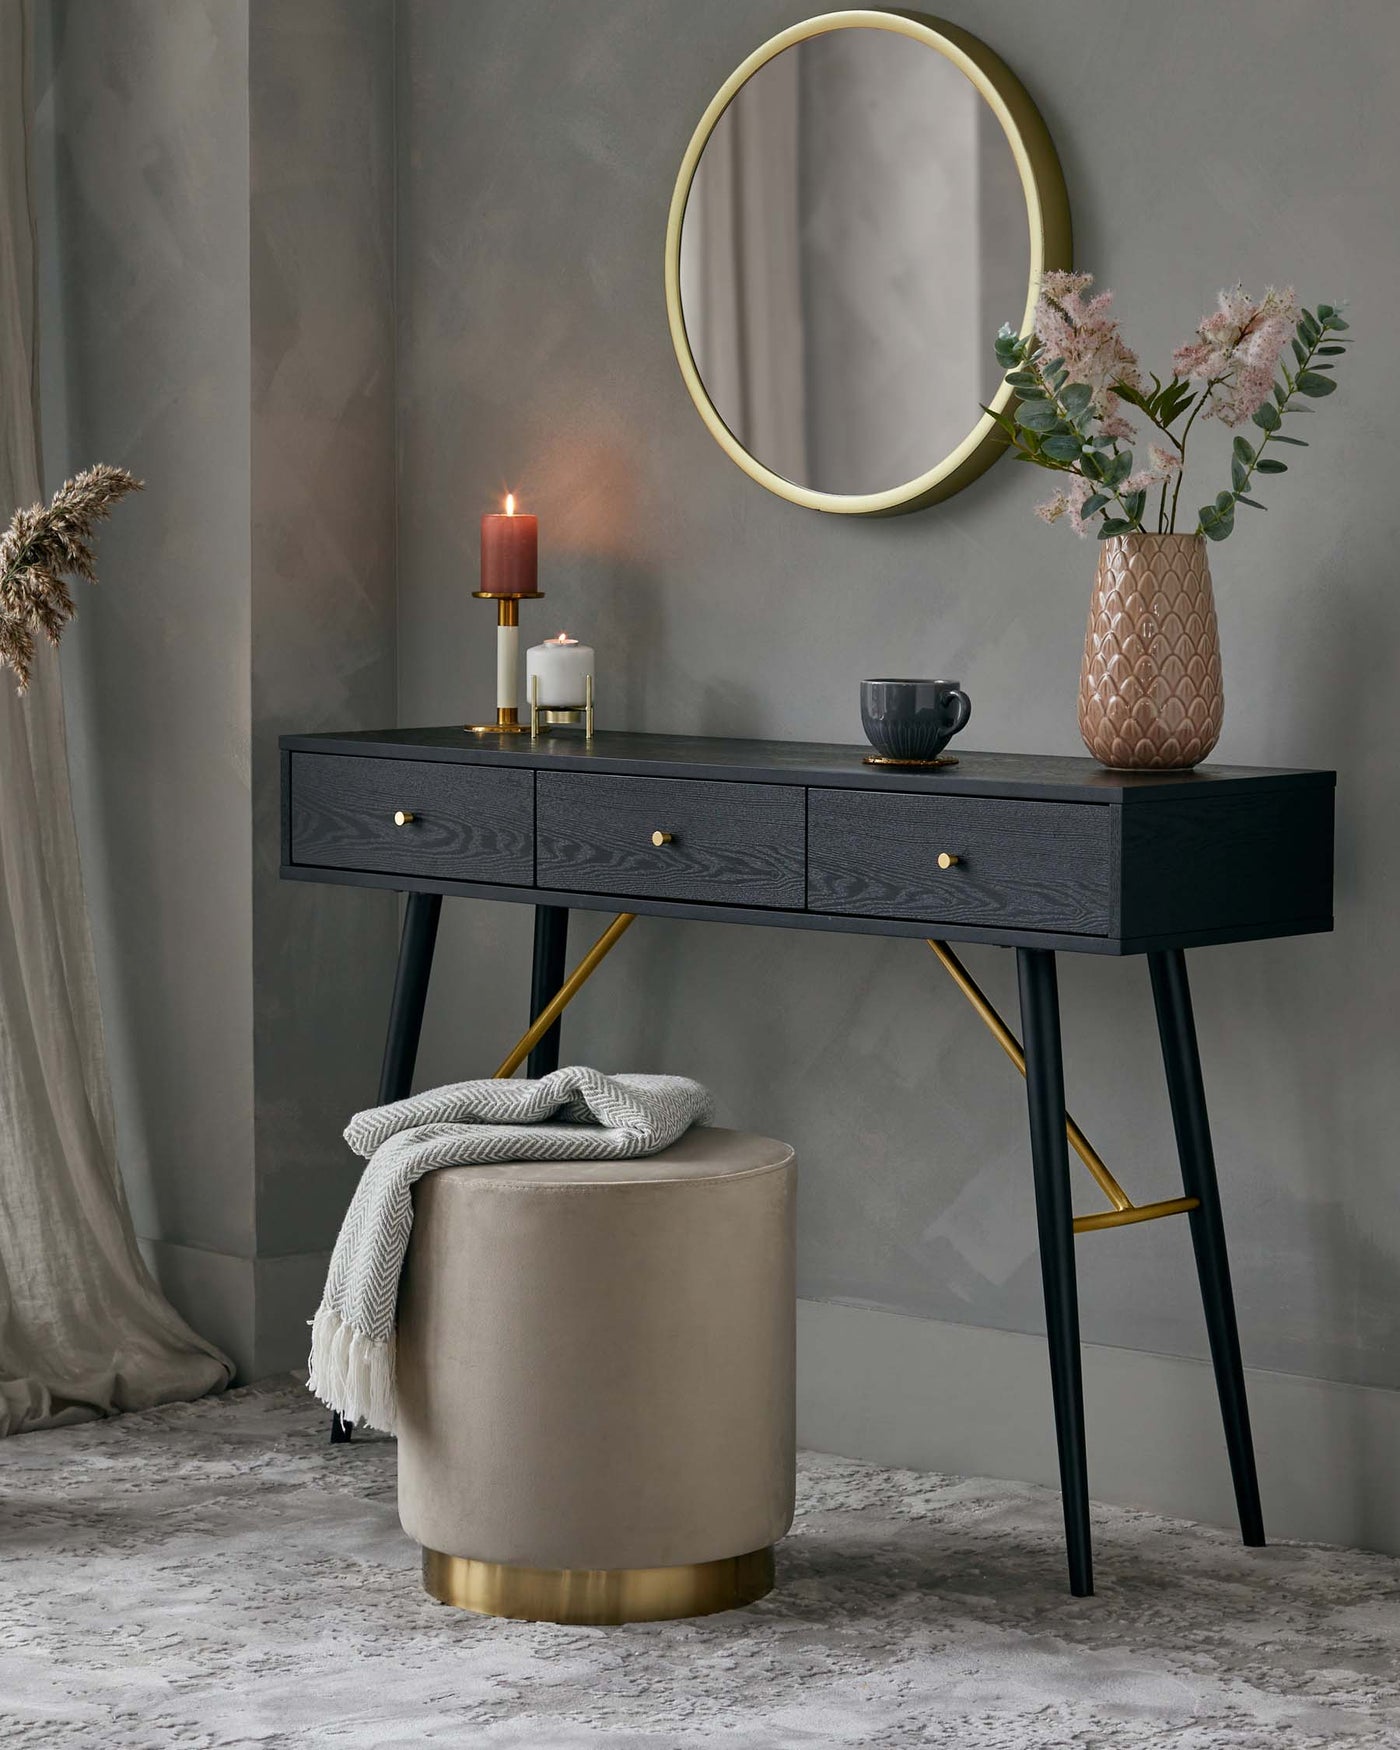 Elegant modern furniture set against a grey textured wall, featuring a sleek black wooden console table with brass handles and slim tapered legs with brass accents, paired with a round, beige upholstered ottoman with a brass base. A tasteful arrangement of accessories complements the scene, including a round mirror with a brass frame, decorative vase with flowers, candles, and a cosy throw.